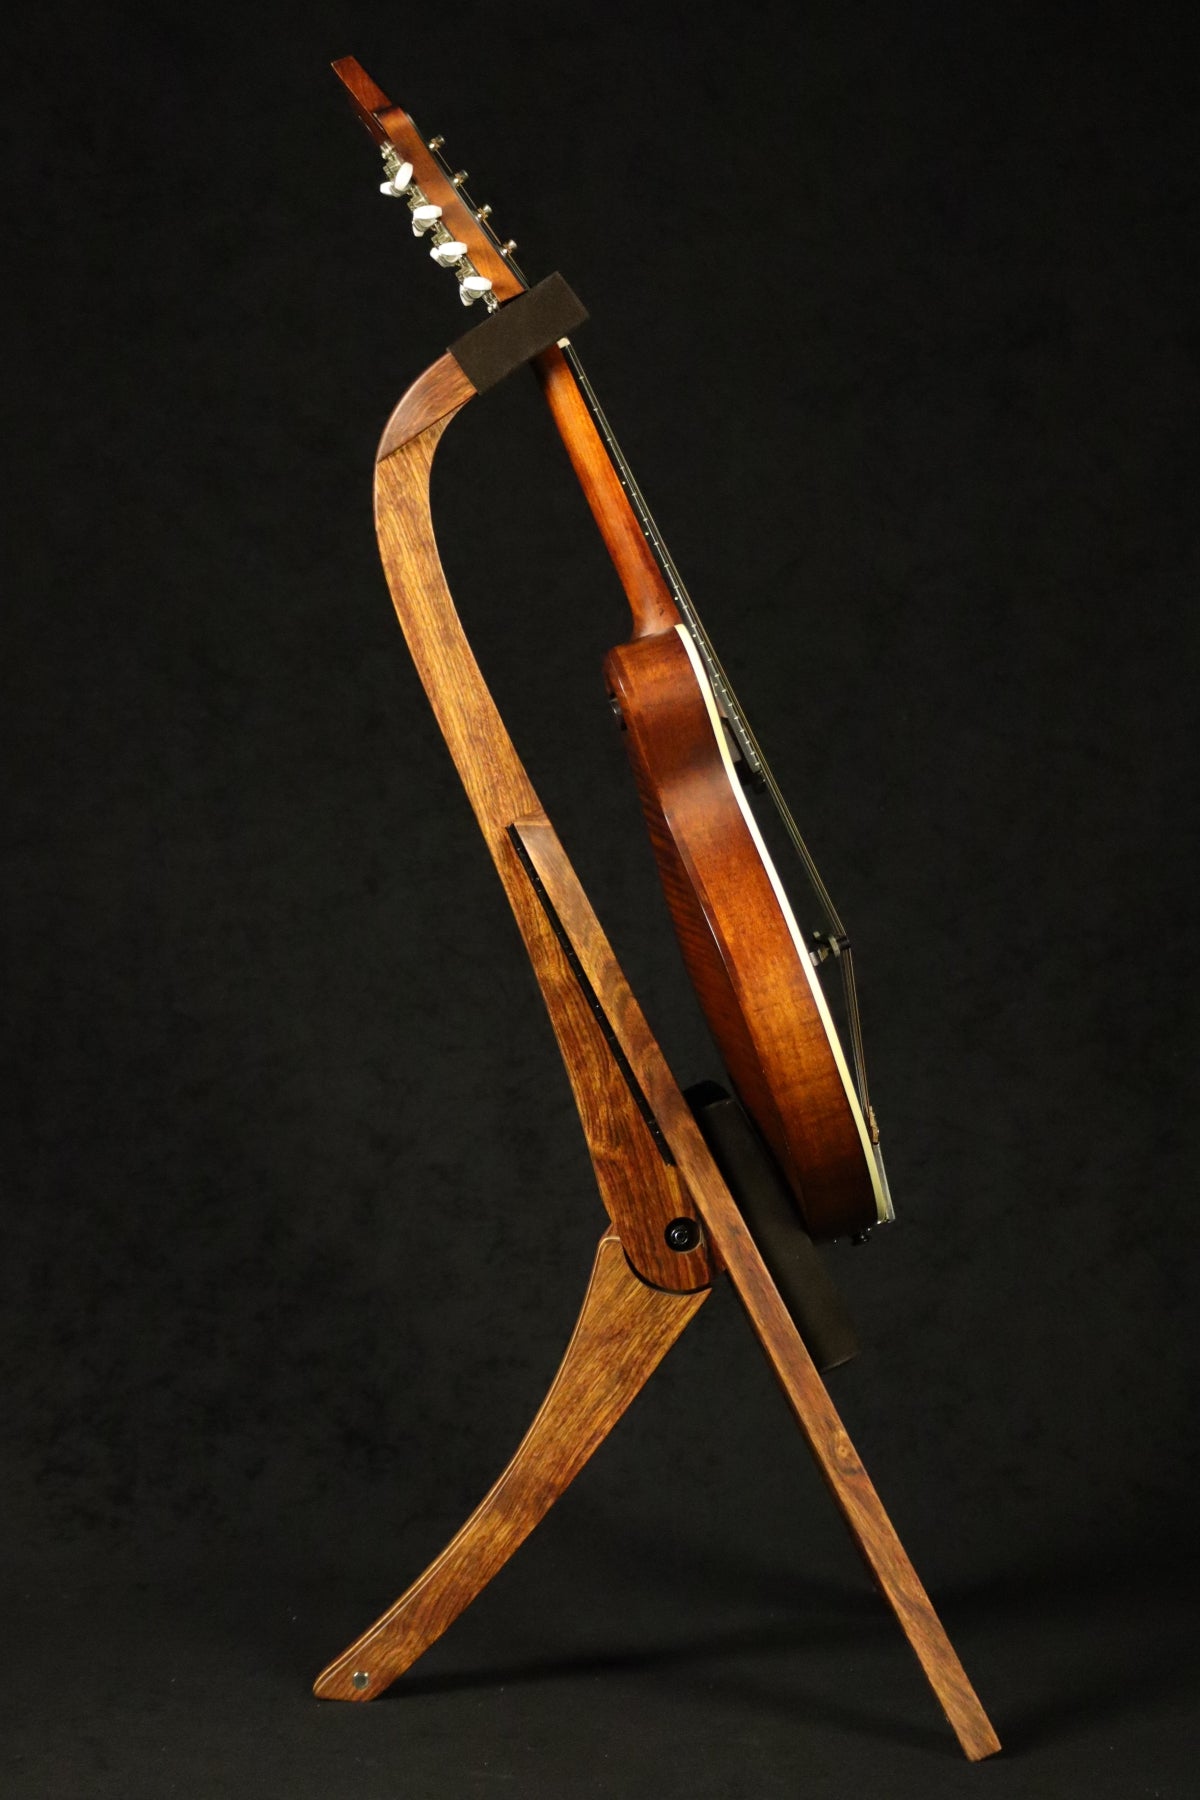 Folding chechen Caribbean rosewood and curly maple wood mandolin floor stand full side image with Eastman mandolin